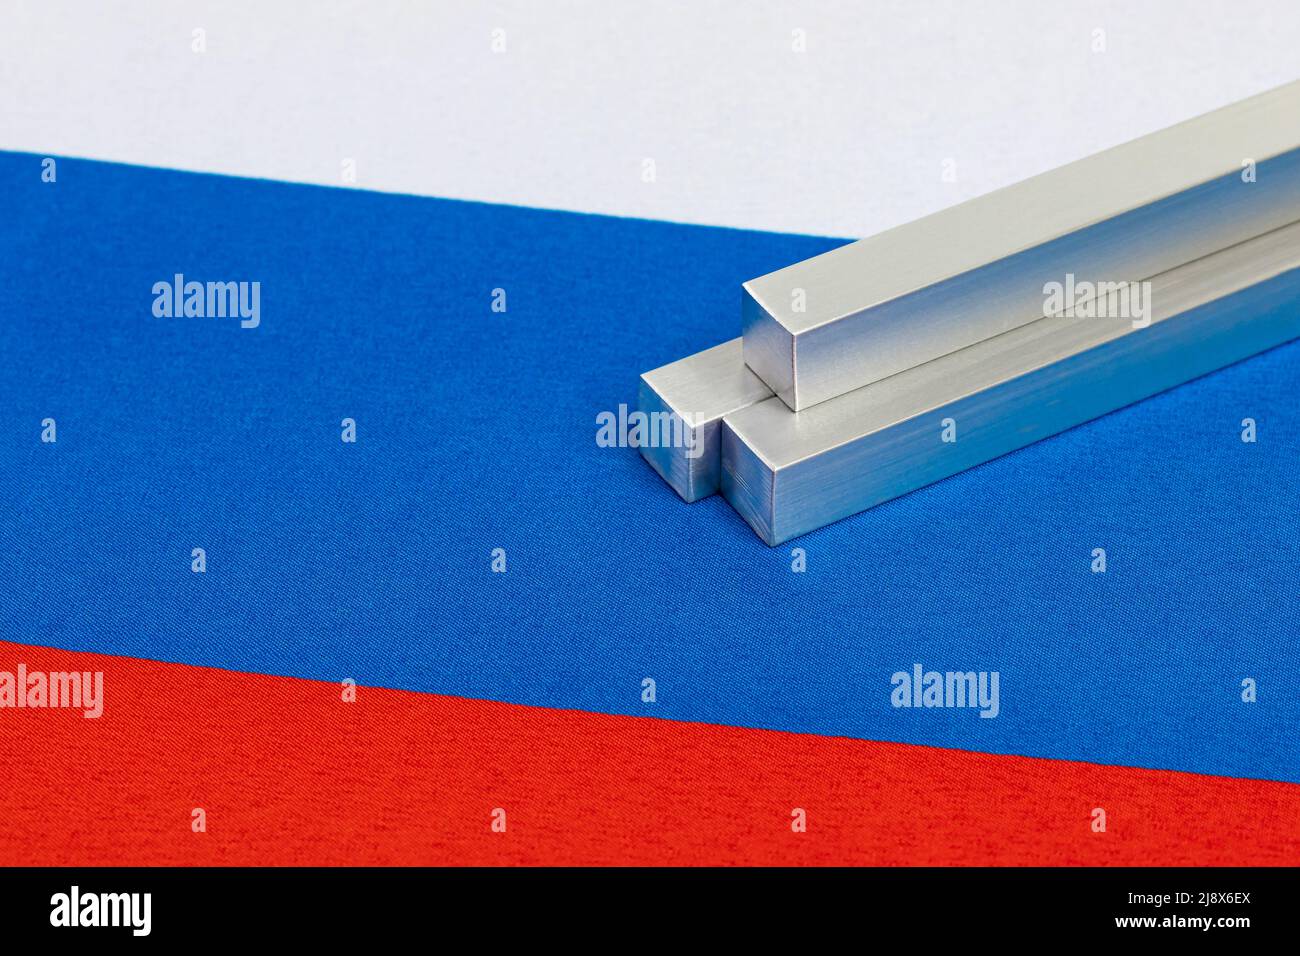 Aluminum metal stock on Russia flag. Russian aluminum exports, trade and industry concept. Stock Photo